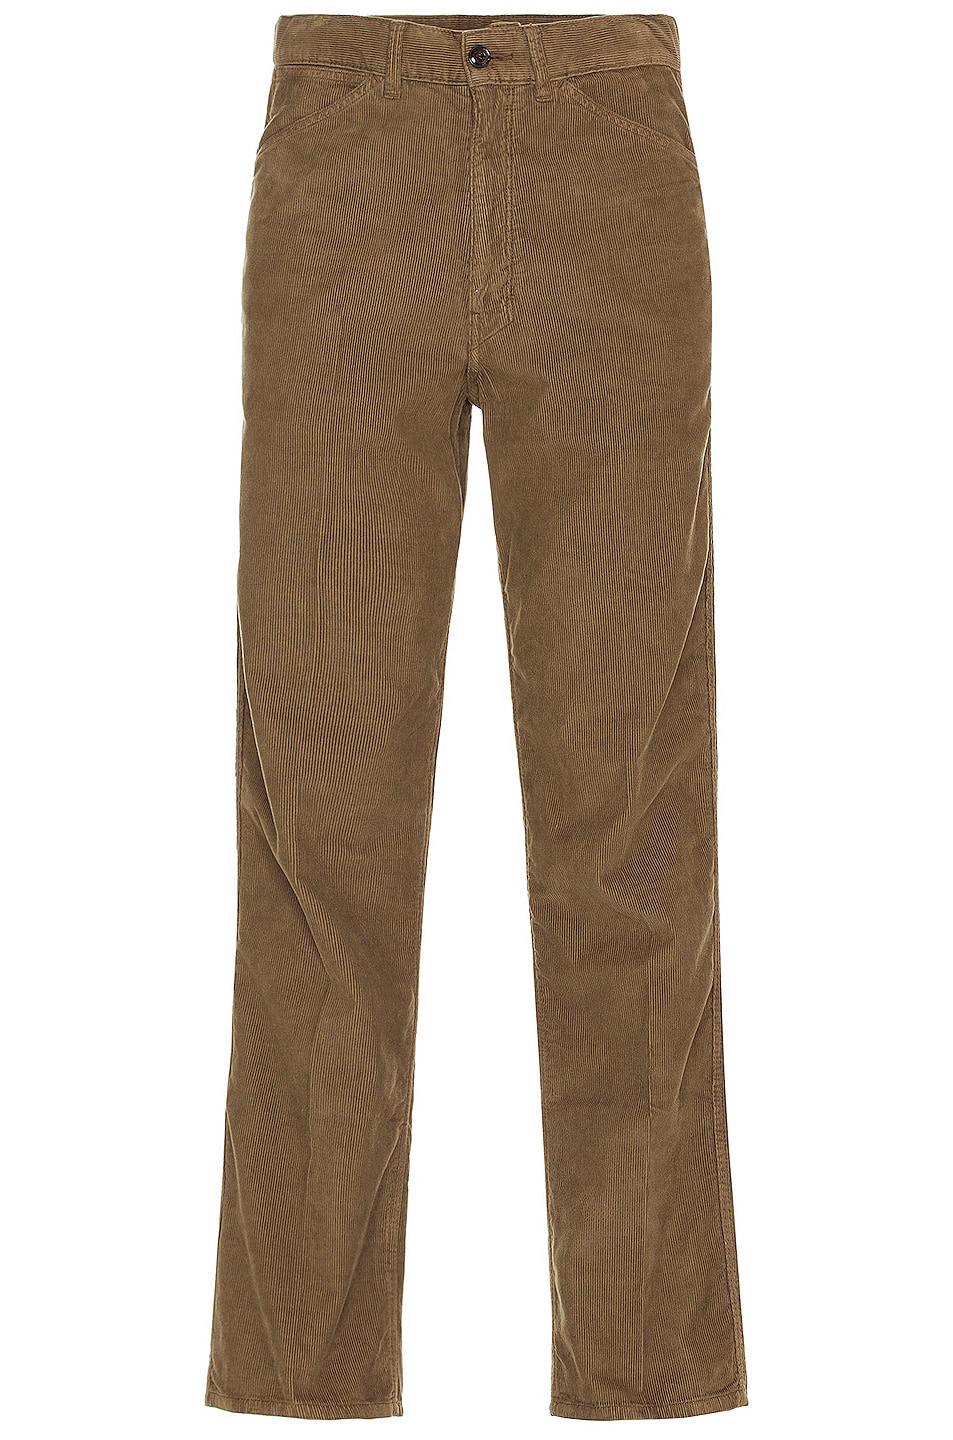 Lemaire 5 Pockets Pants in Brown | FWRD